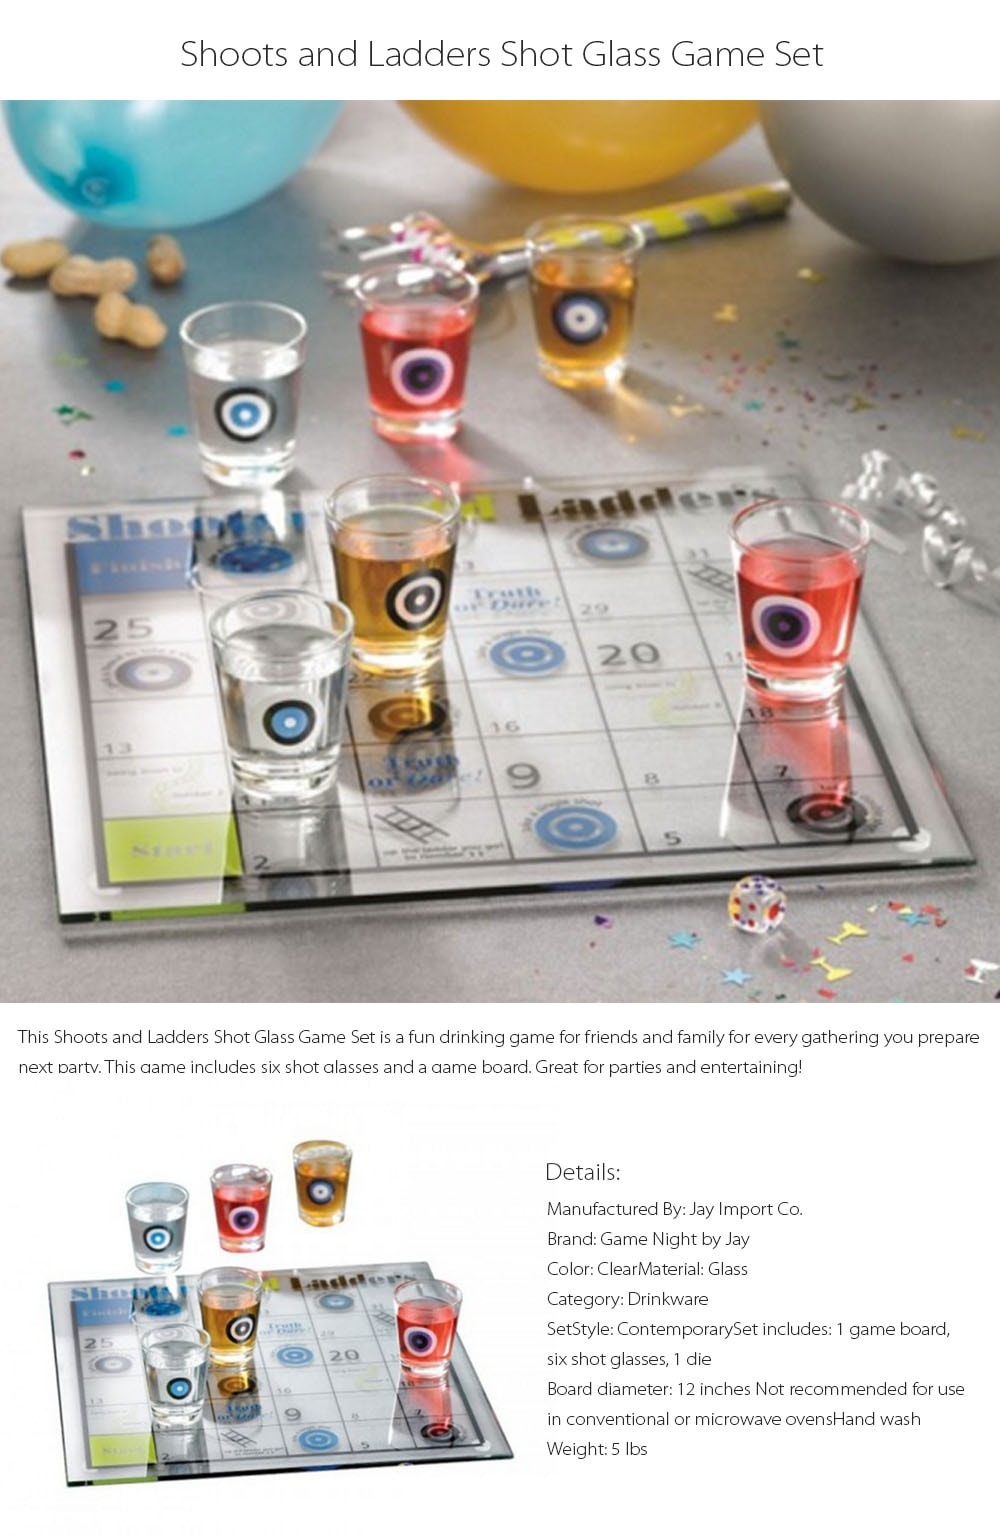 Shoots and Ladders Shot Glass Game Set from Apollo Box